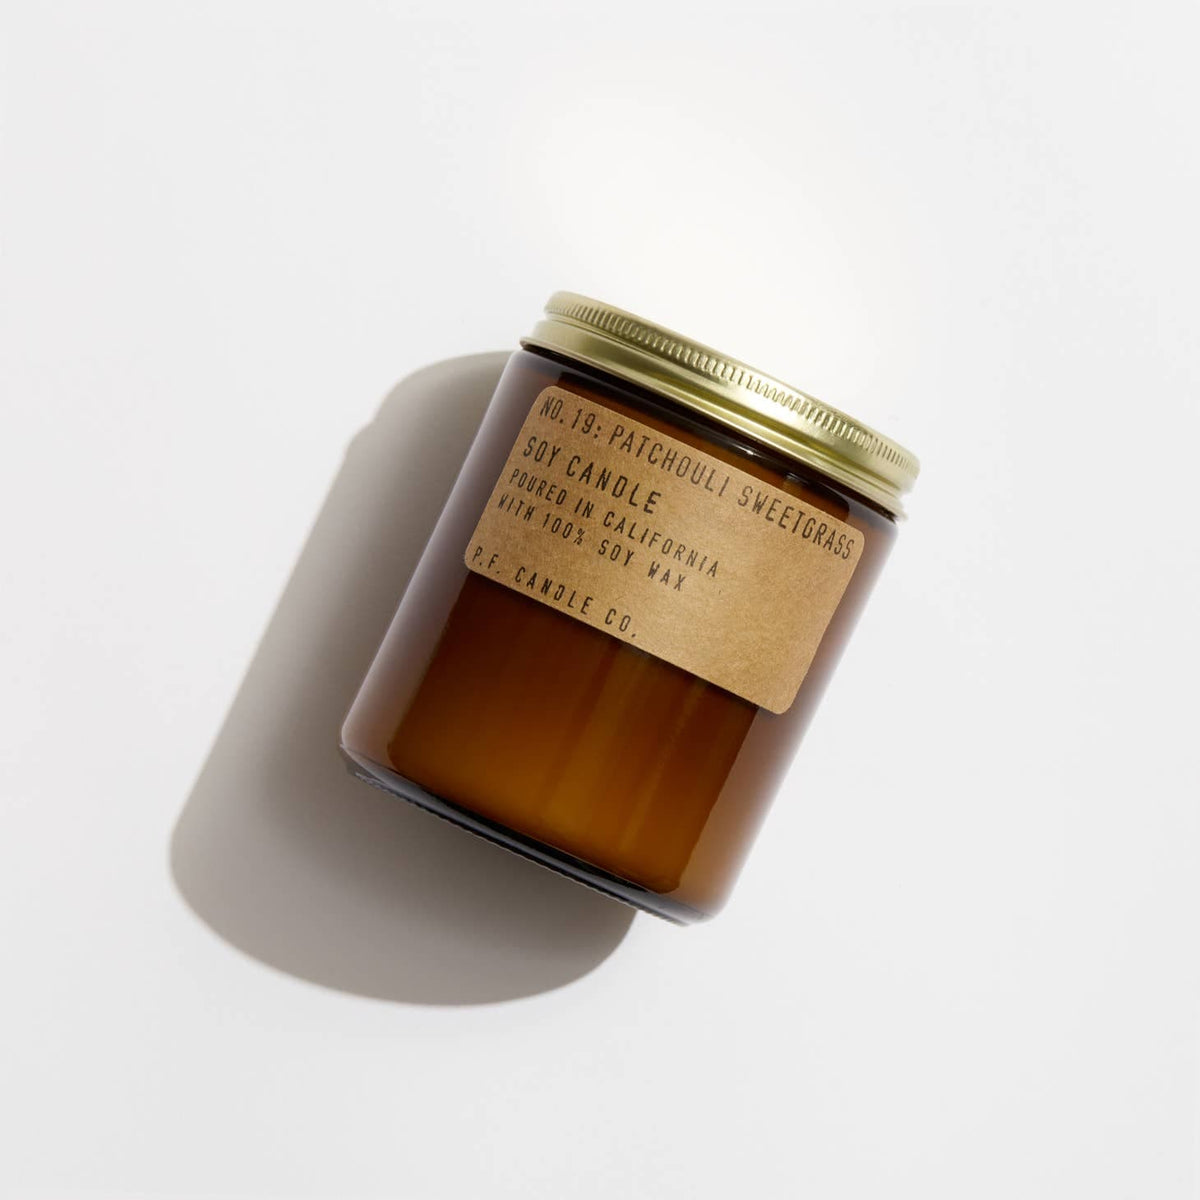 P.F. Candle Co Patchouli Sweetgrass Soy Candle